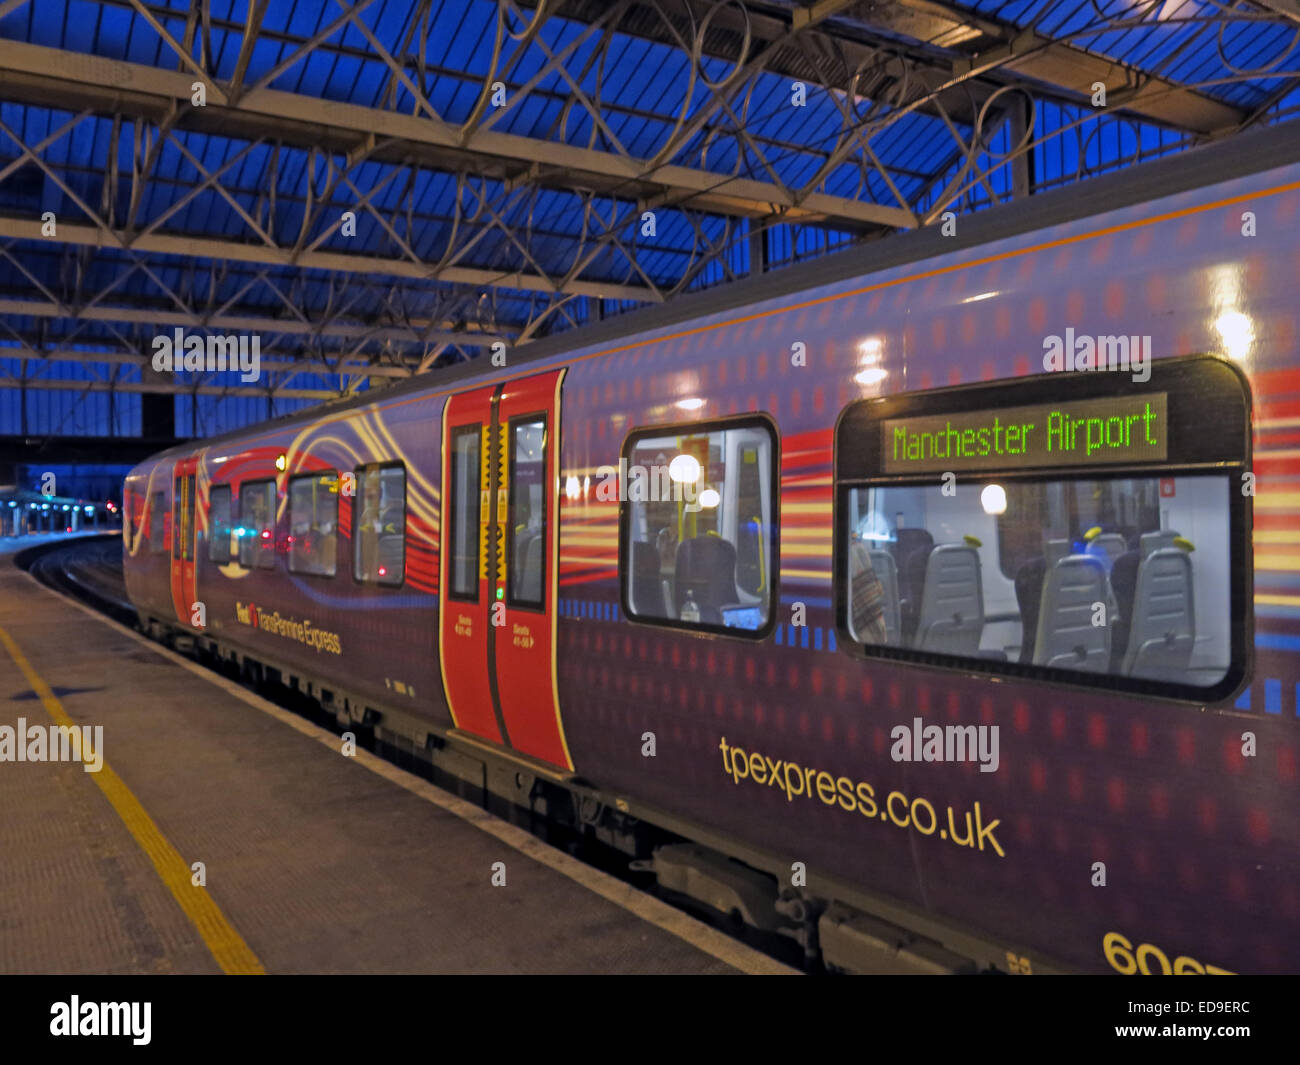 First transPennine Express train for Manchester Airport at dusk at Carlisle station Stock Photo